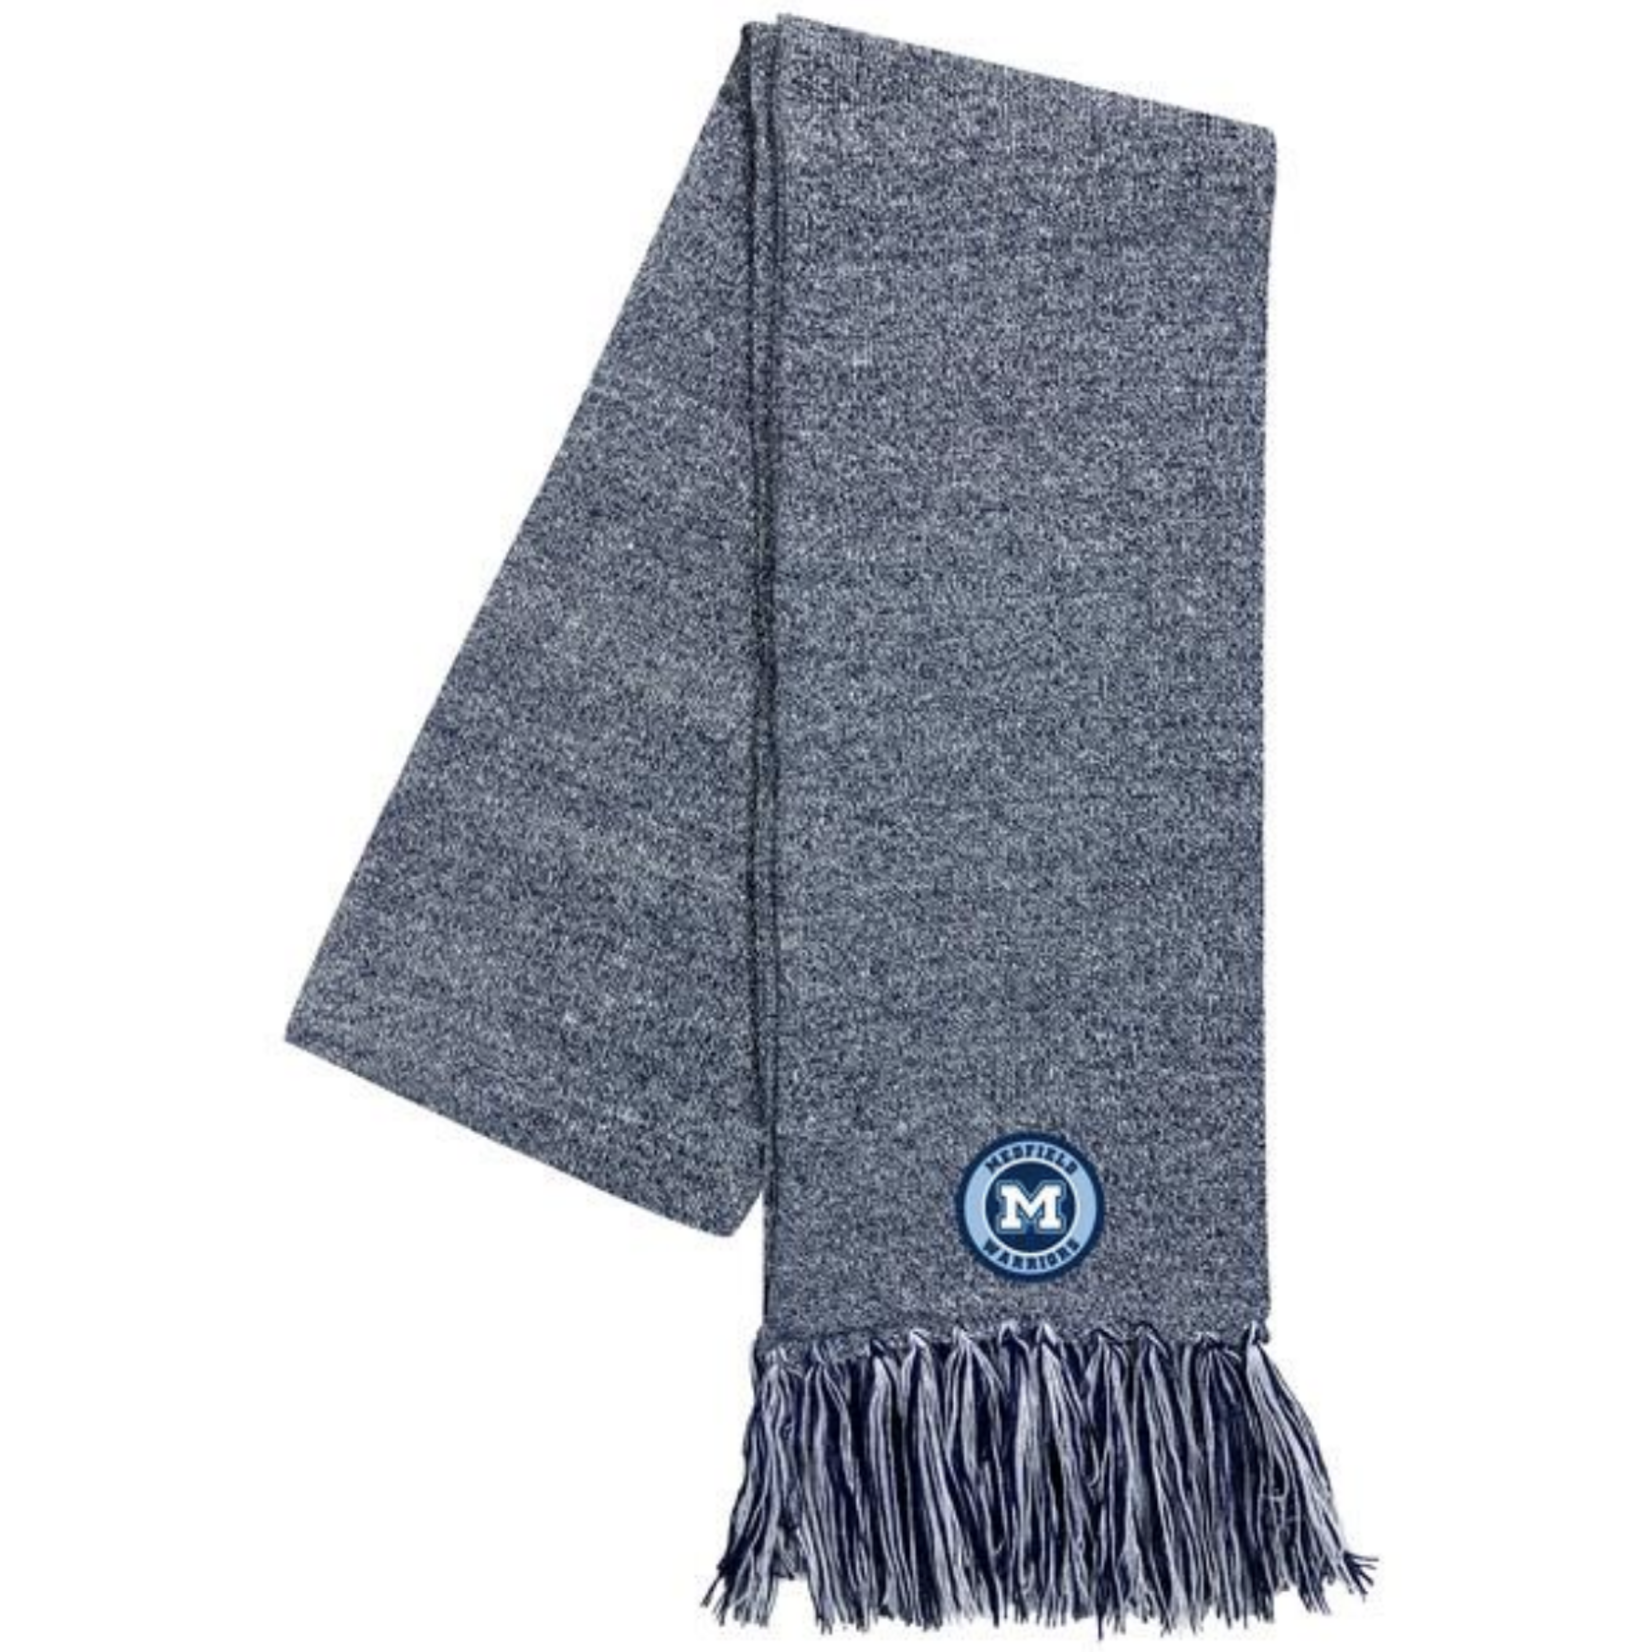 Legacy - Navy Marled Scarf with Medfield Circle Art